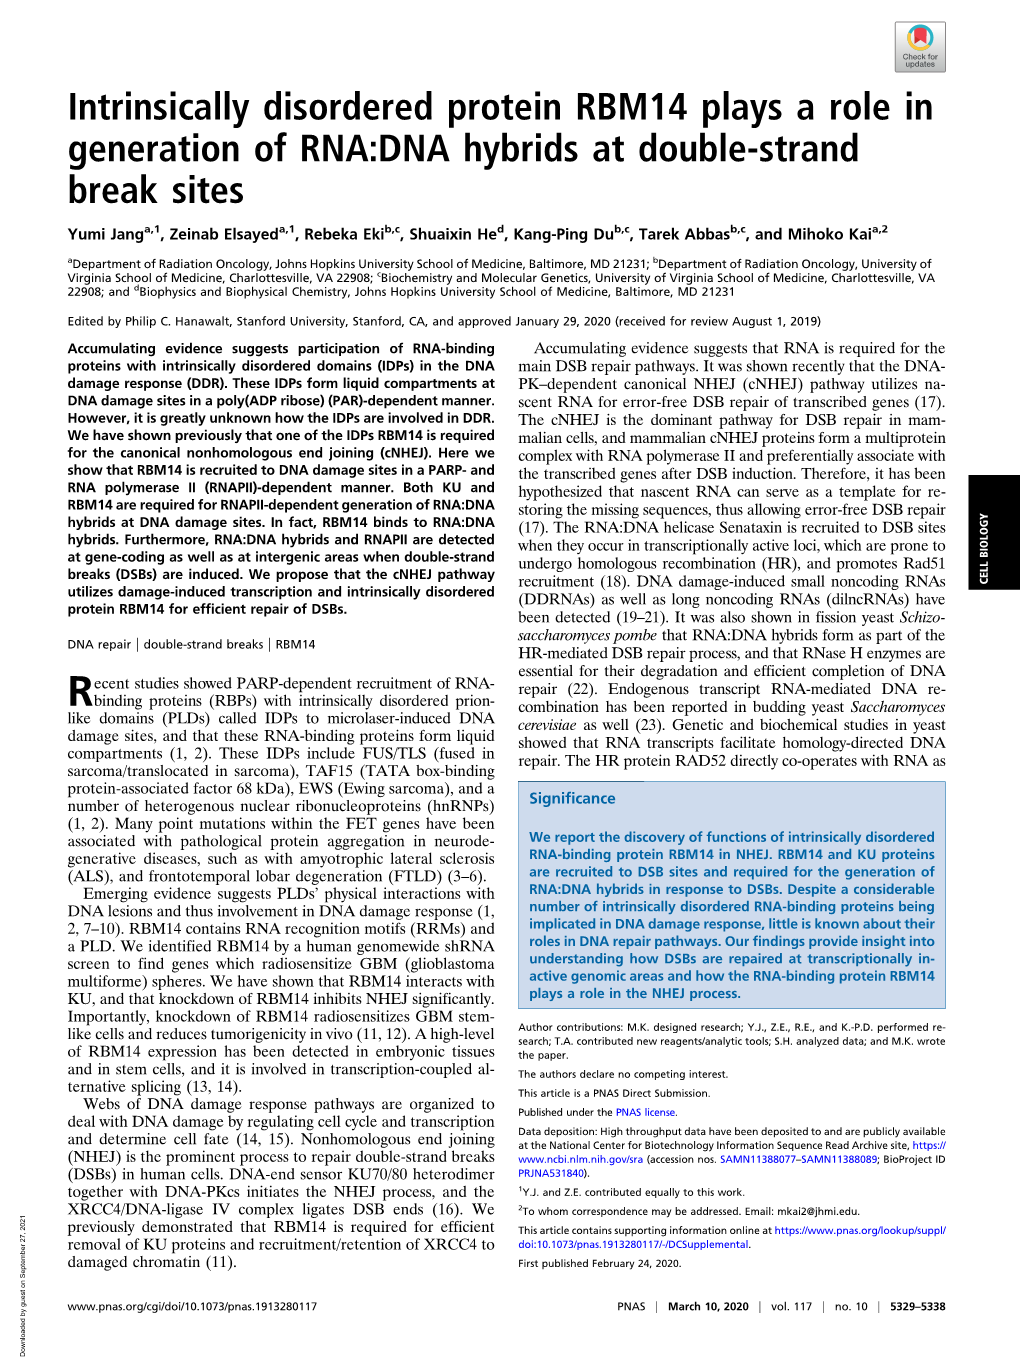 Intrinsically Disordered Protein RBM14 Plays a Role in Generation of RNA:DNA Hybrids at Double-Strand Break Sites